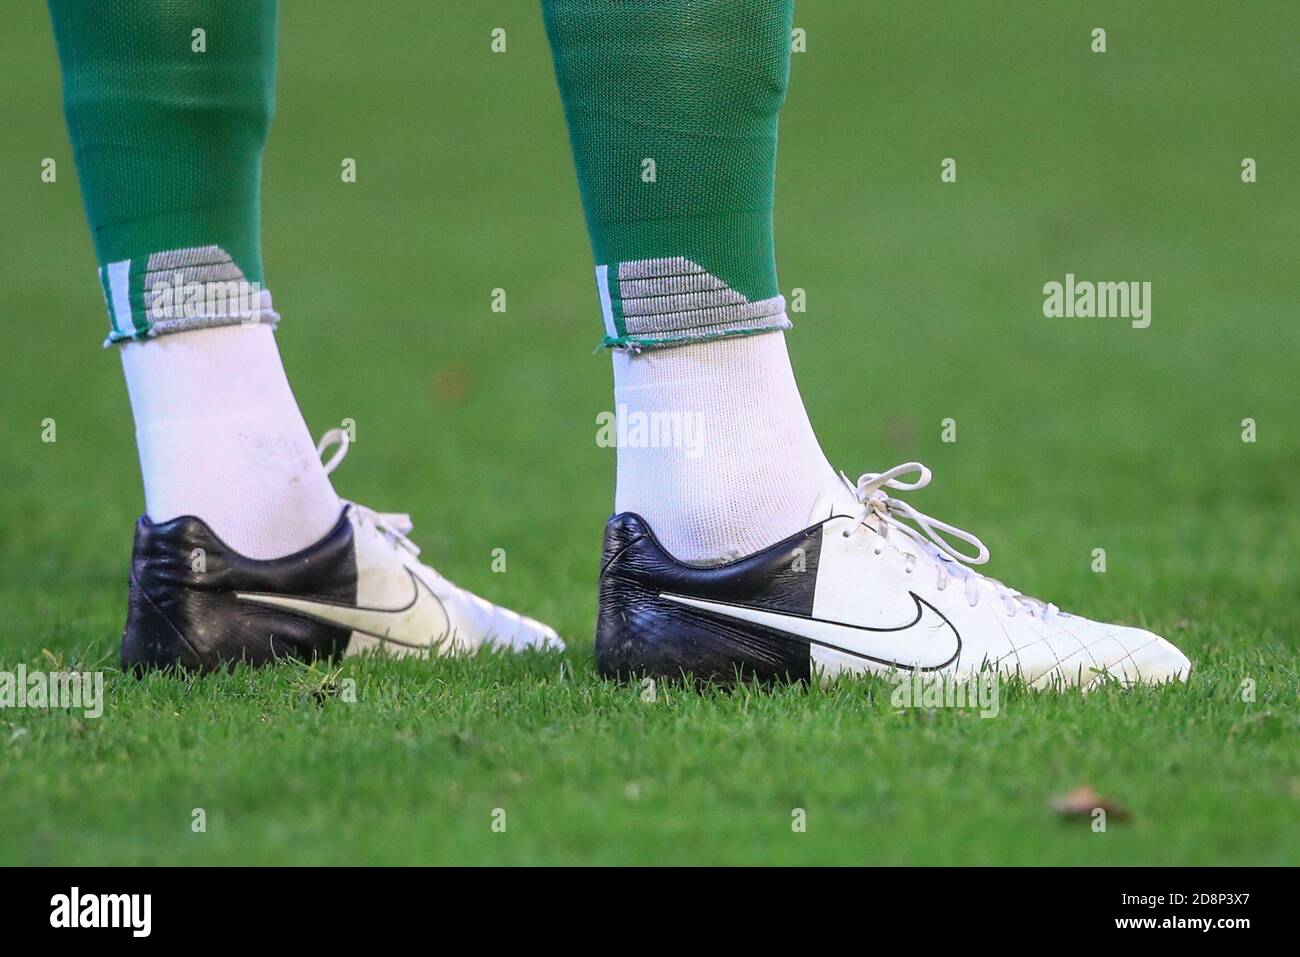 Ben Foster (1) of Watford's Nike football boots Stock Photo - Alamy